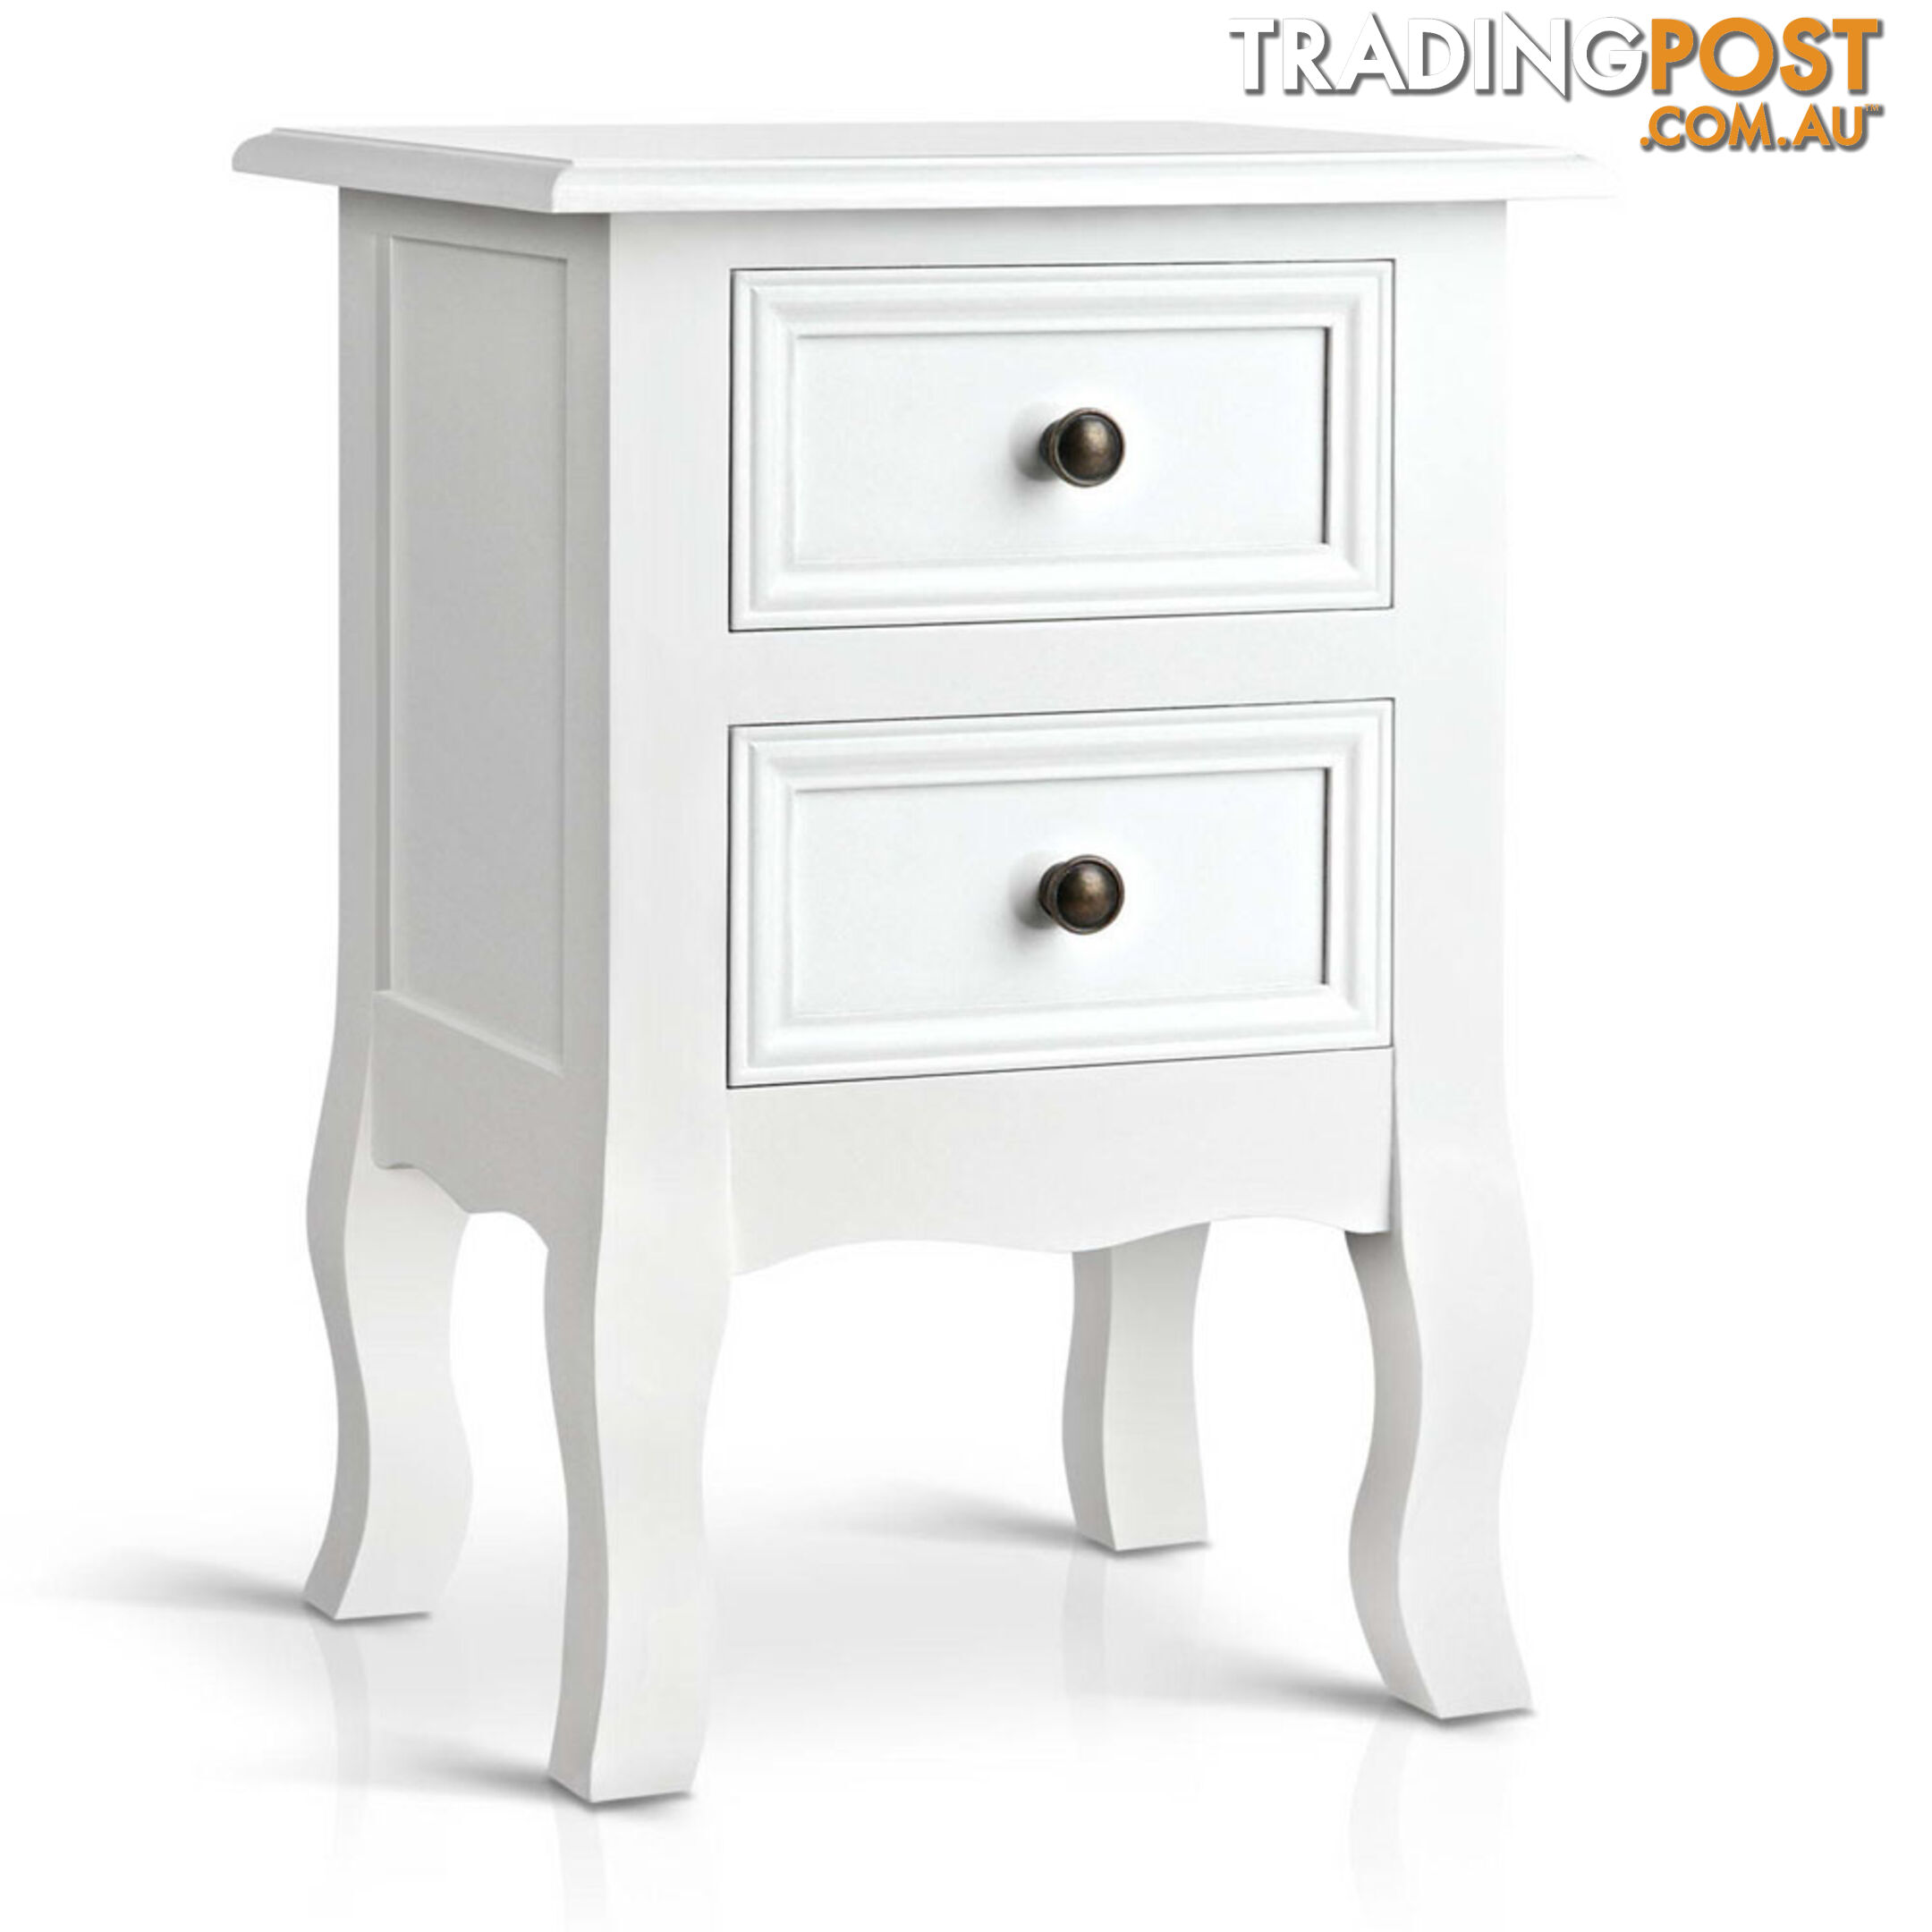 Vintage Style Bedside Side Table with 2 Drawers - White